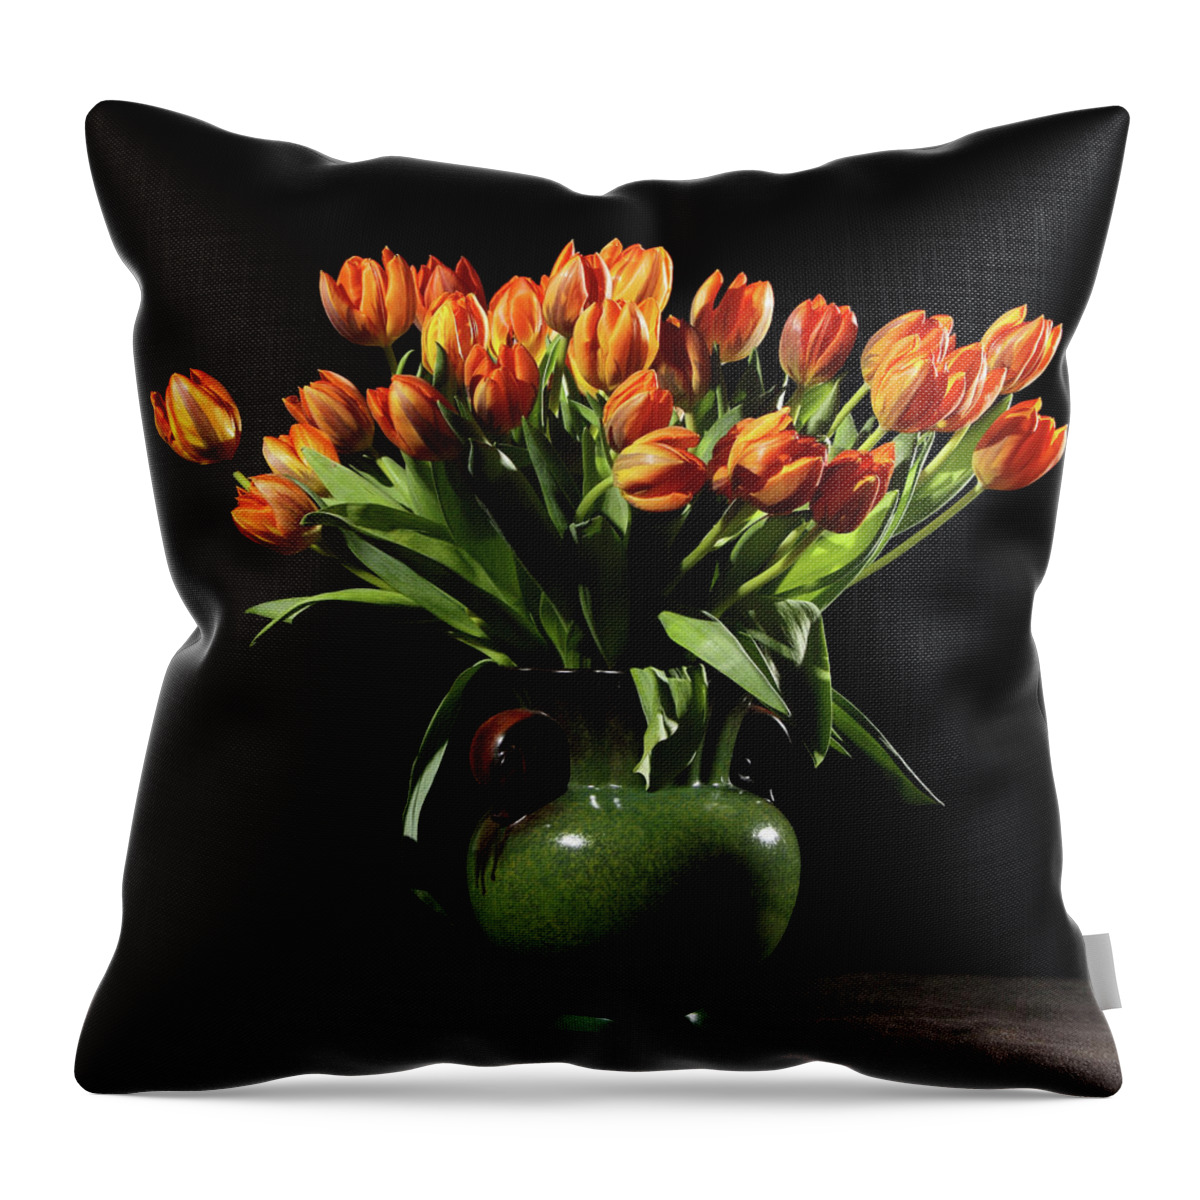 Vase Throw Pillow featuring the photograph Still Life With Tulips by Sebastian Schneider